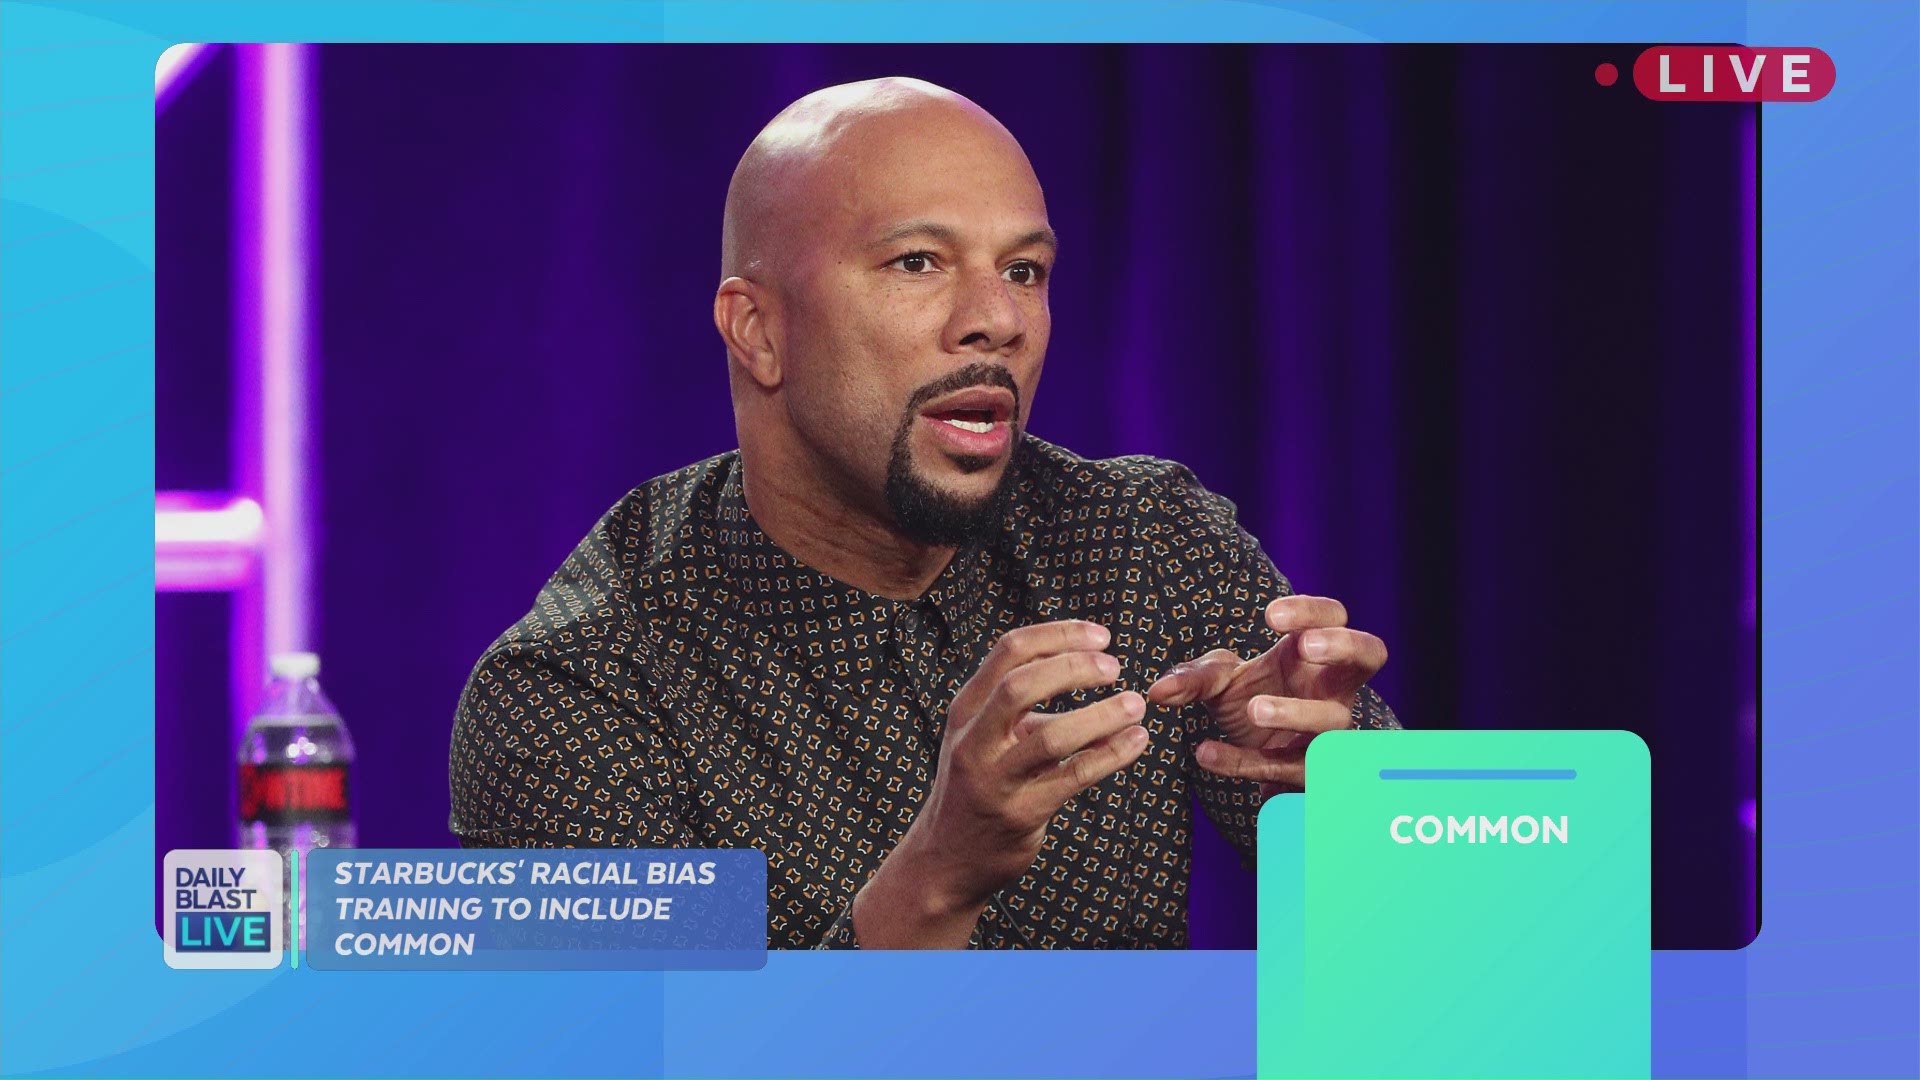 In the wake of controversy, coffee giant Starbucks is holding a companywide training session that will include a special appearance from hip hop artist Common. More than 8,000 stores across America are shutting down so that 175,000 employees can undergo r